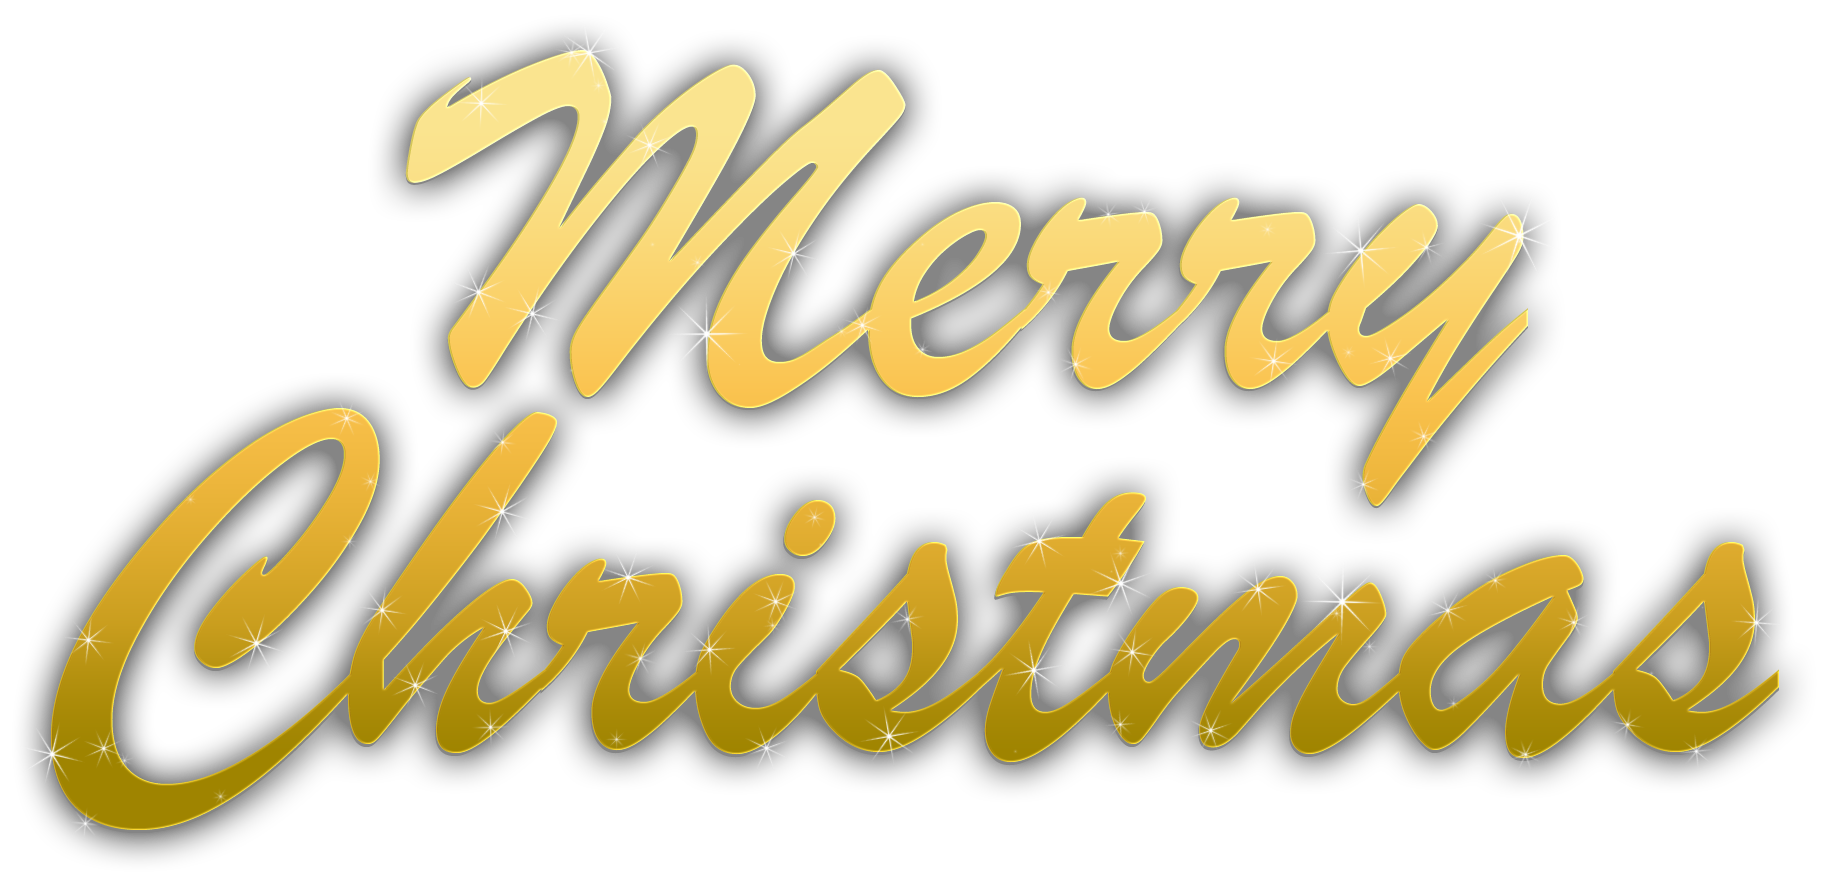 Merry Christmas PNG Image Transparent - Merry Christmas Png